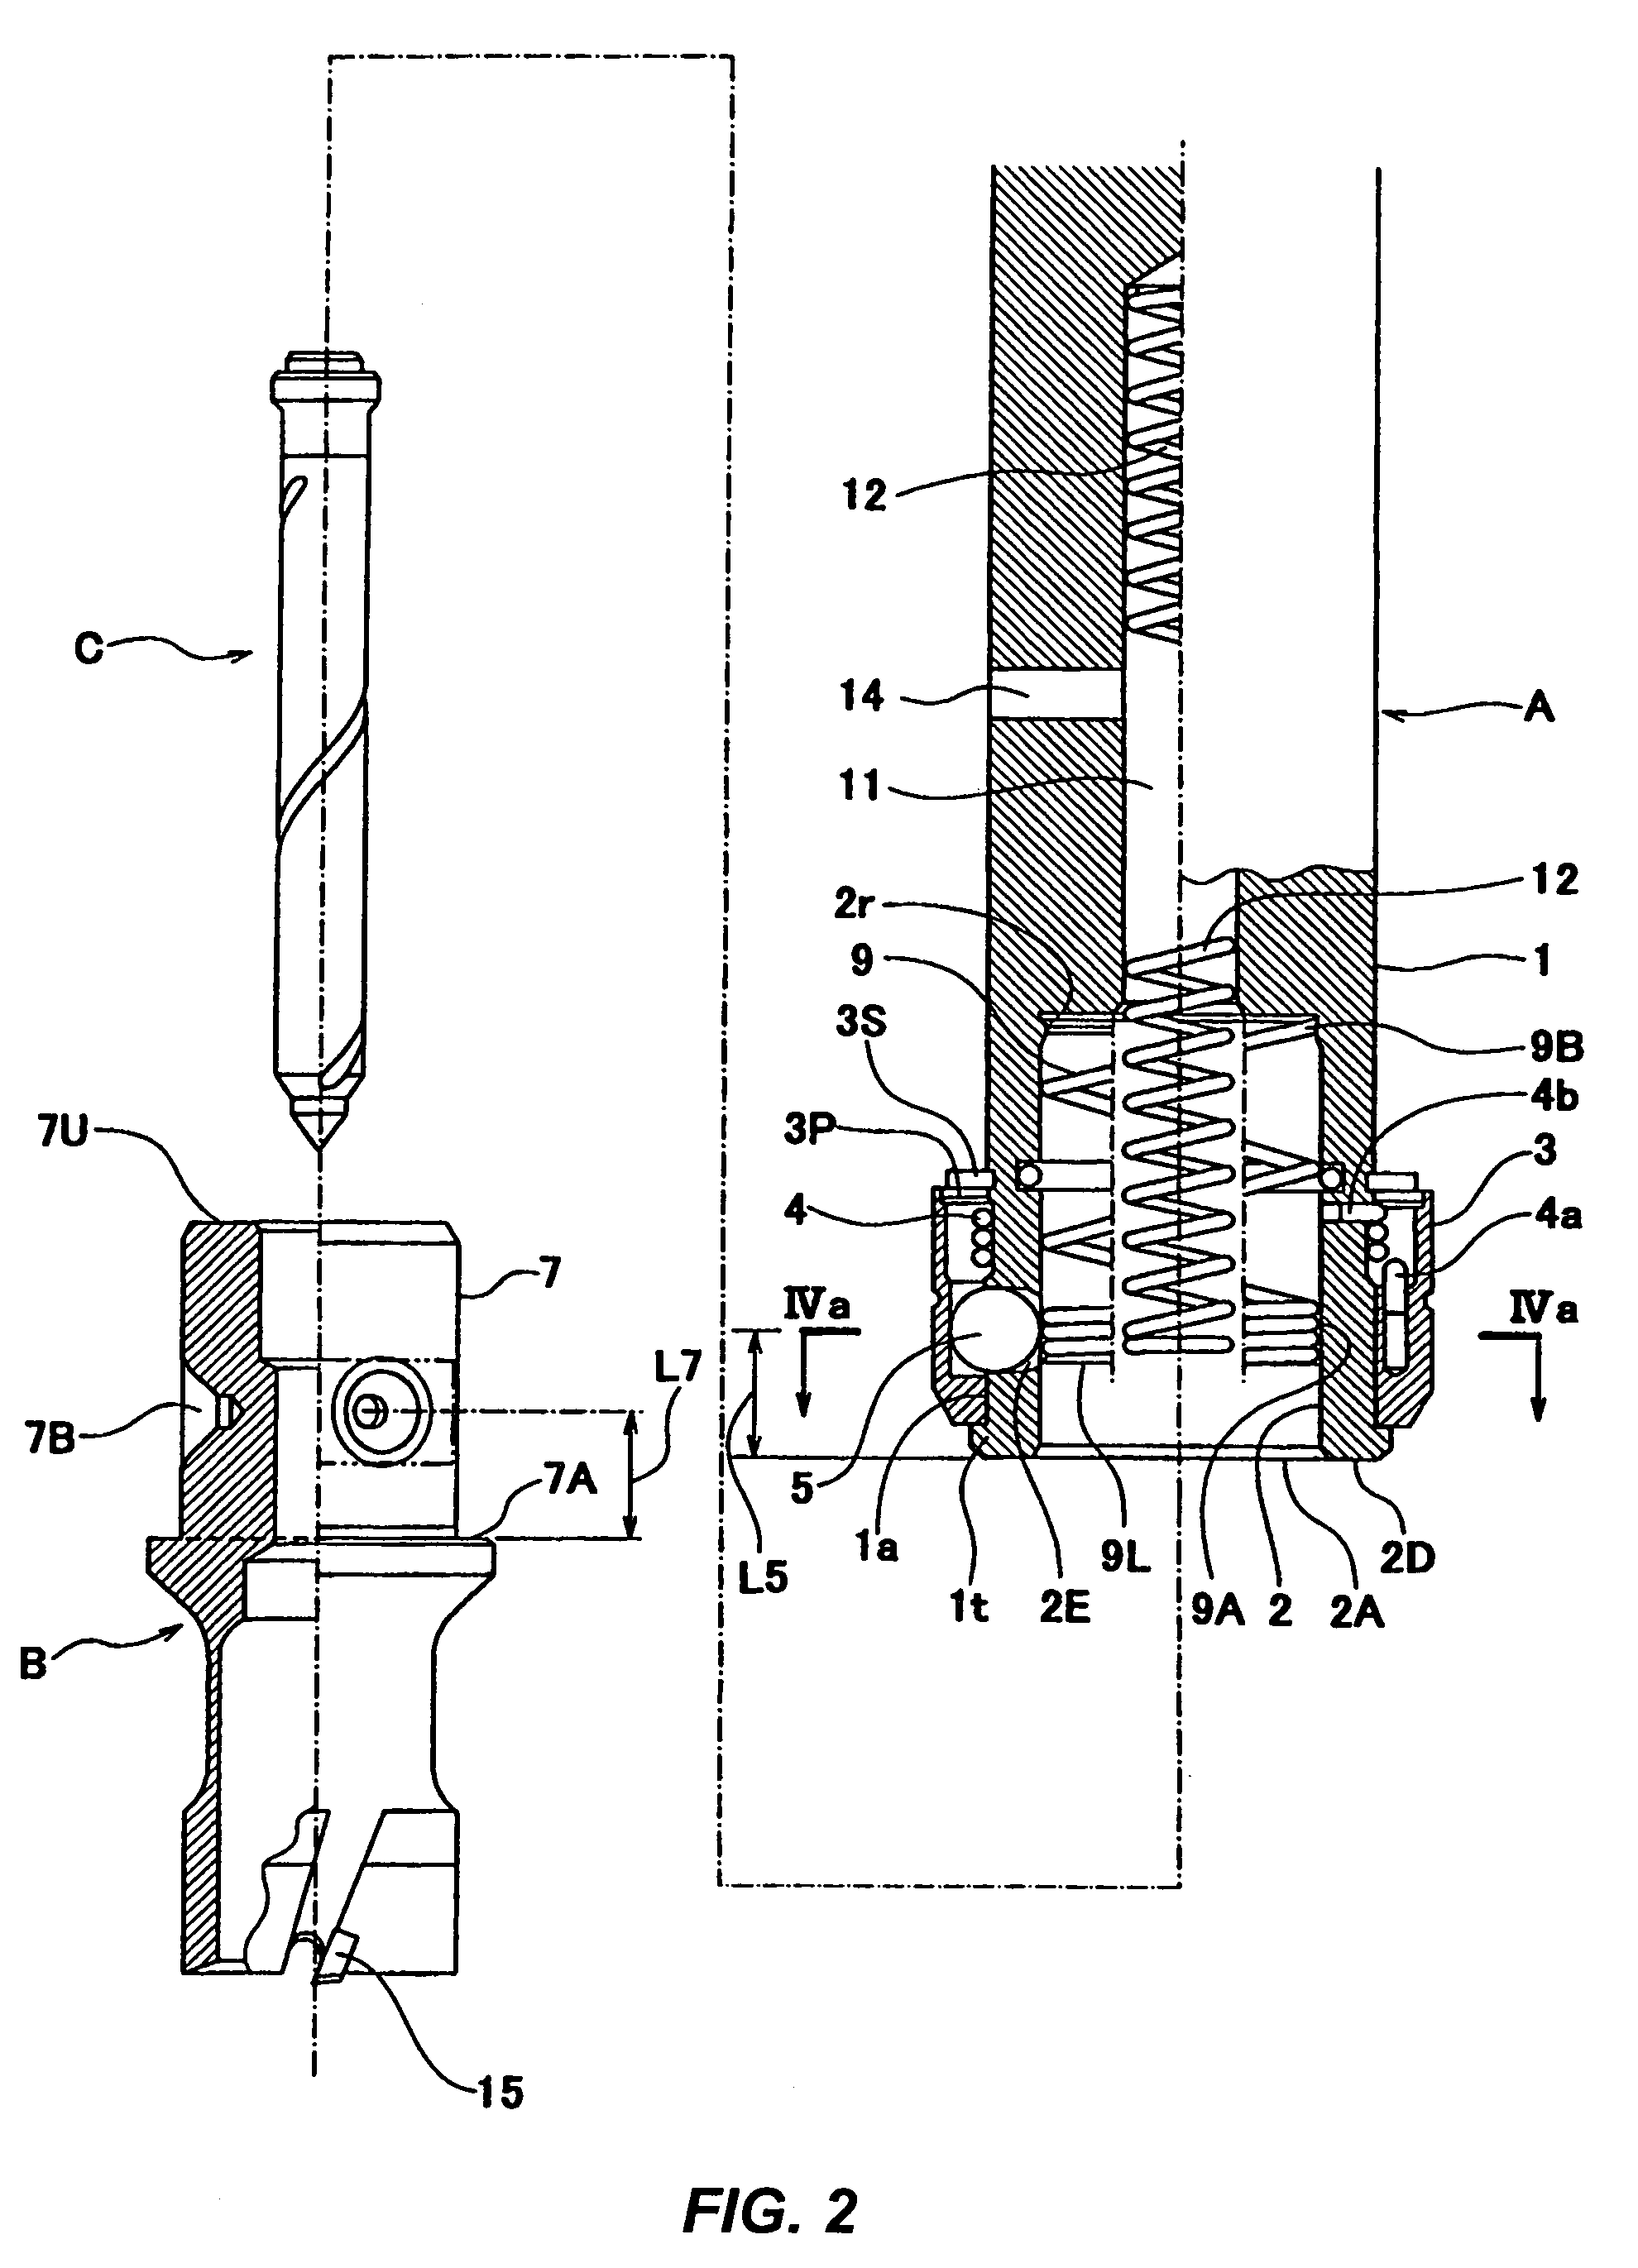 Shank installation structure and cutters